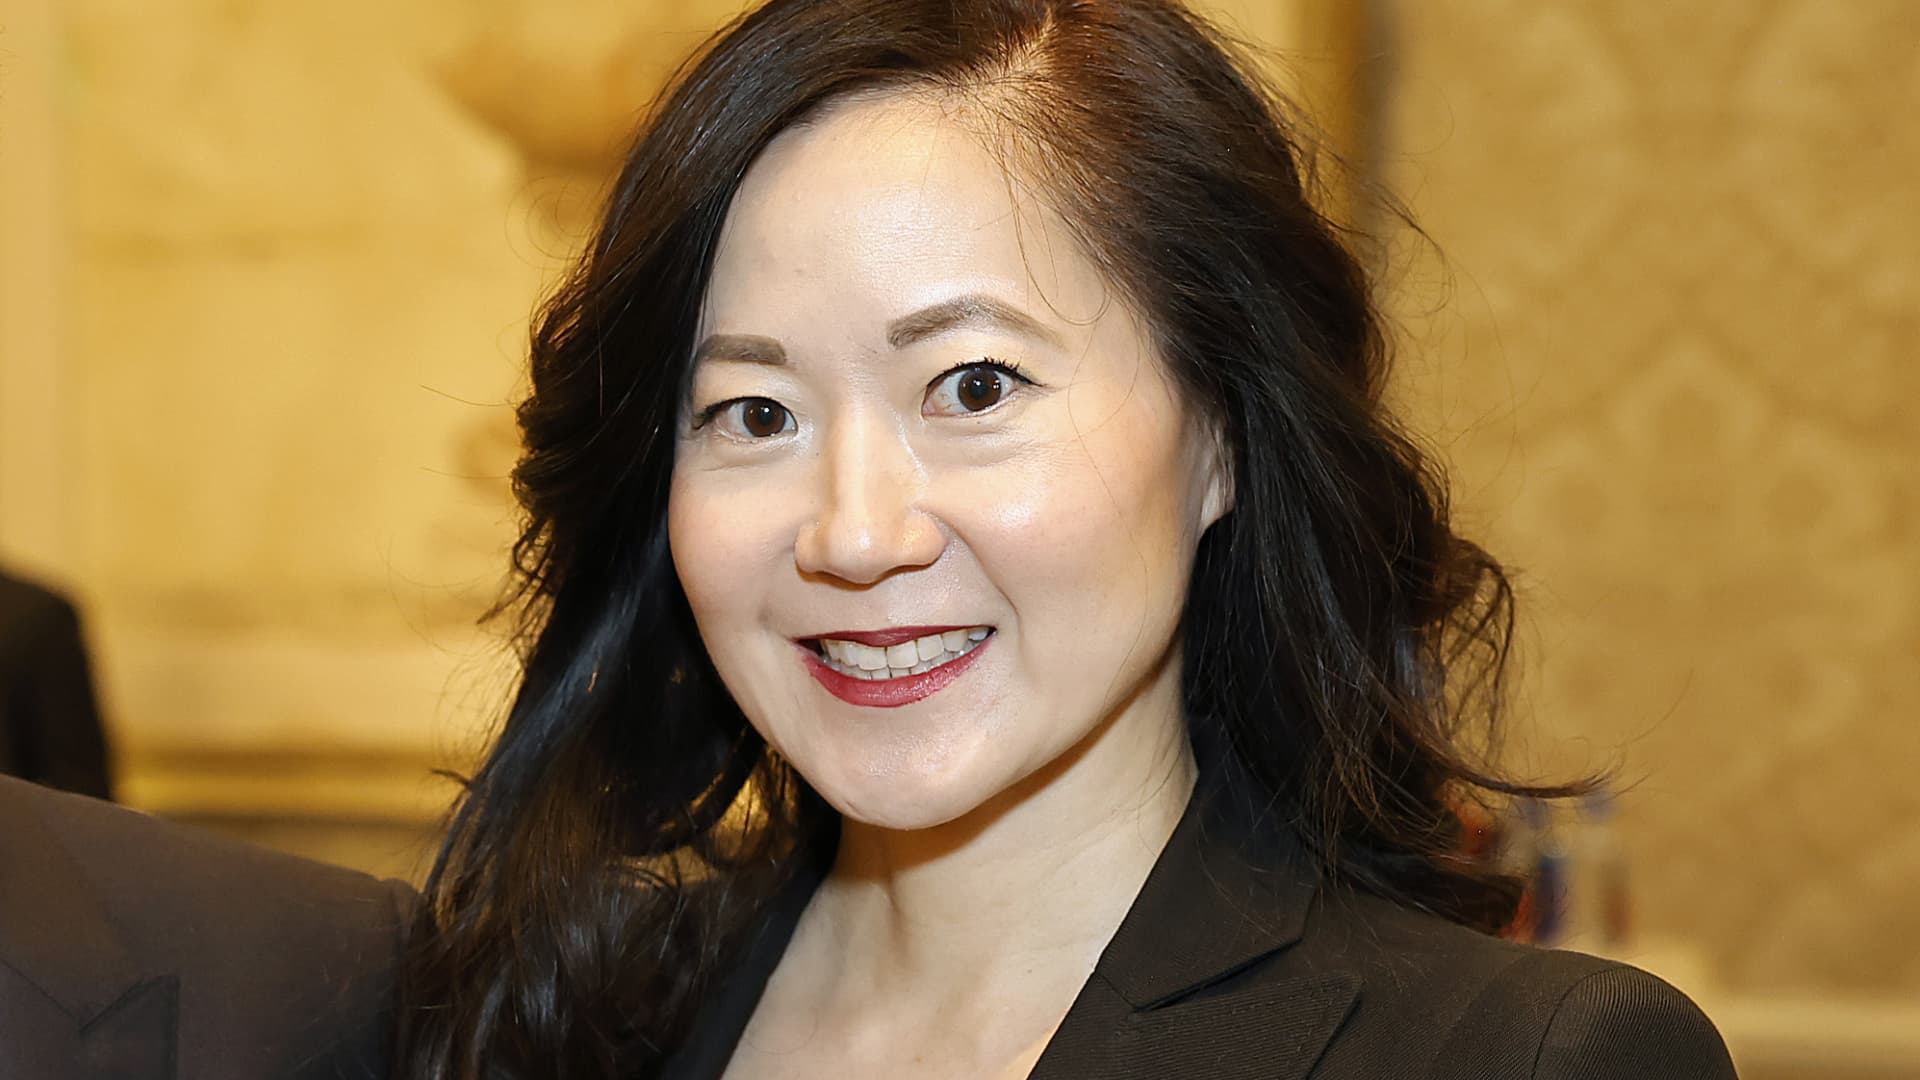 Fundamental Community CEO Angela Chao became intoxicated at some level of lethal car accident in Texas pond, police affirm